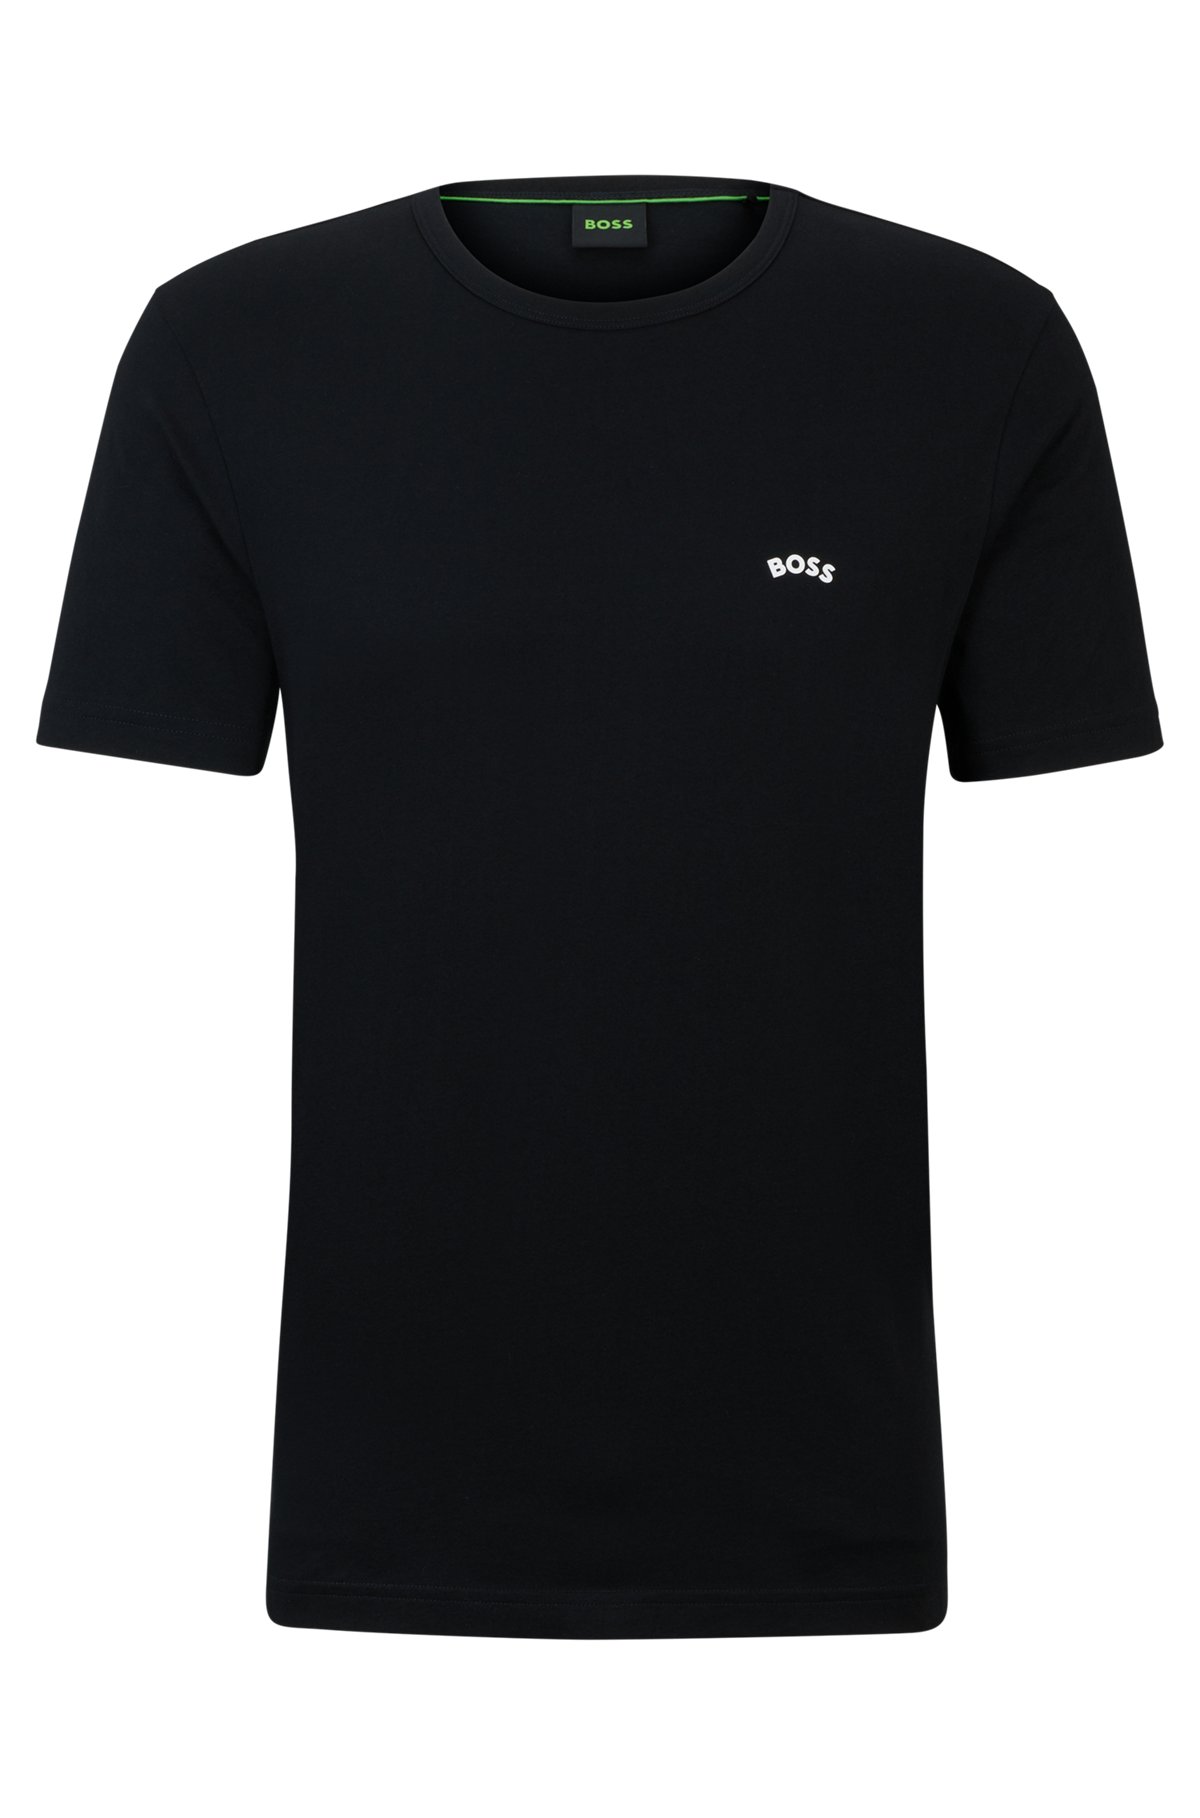 Cotton-jersey T-shirt with curved logo, Black